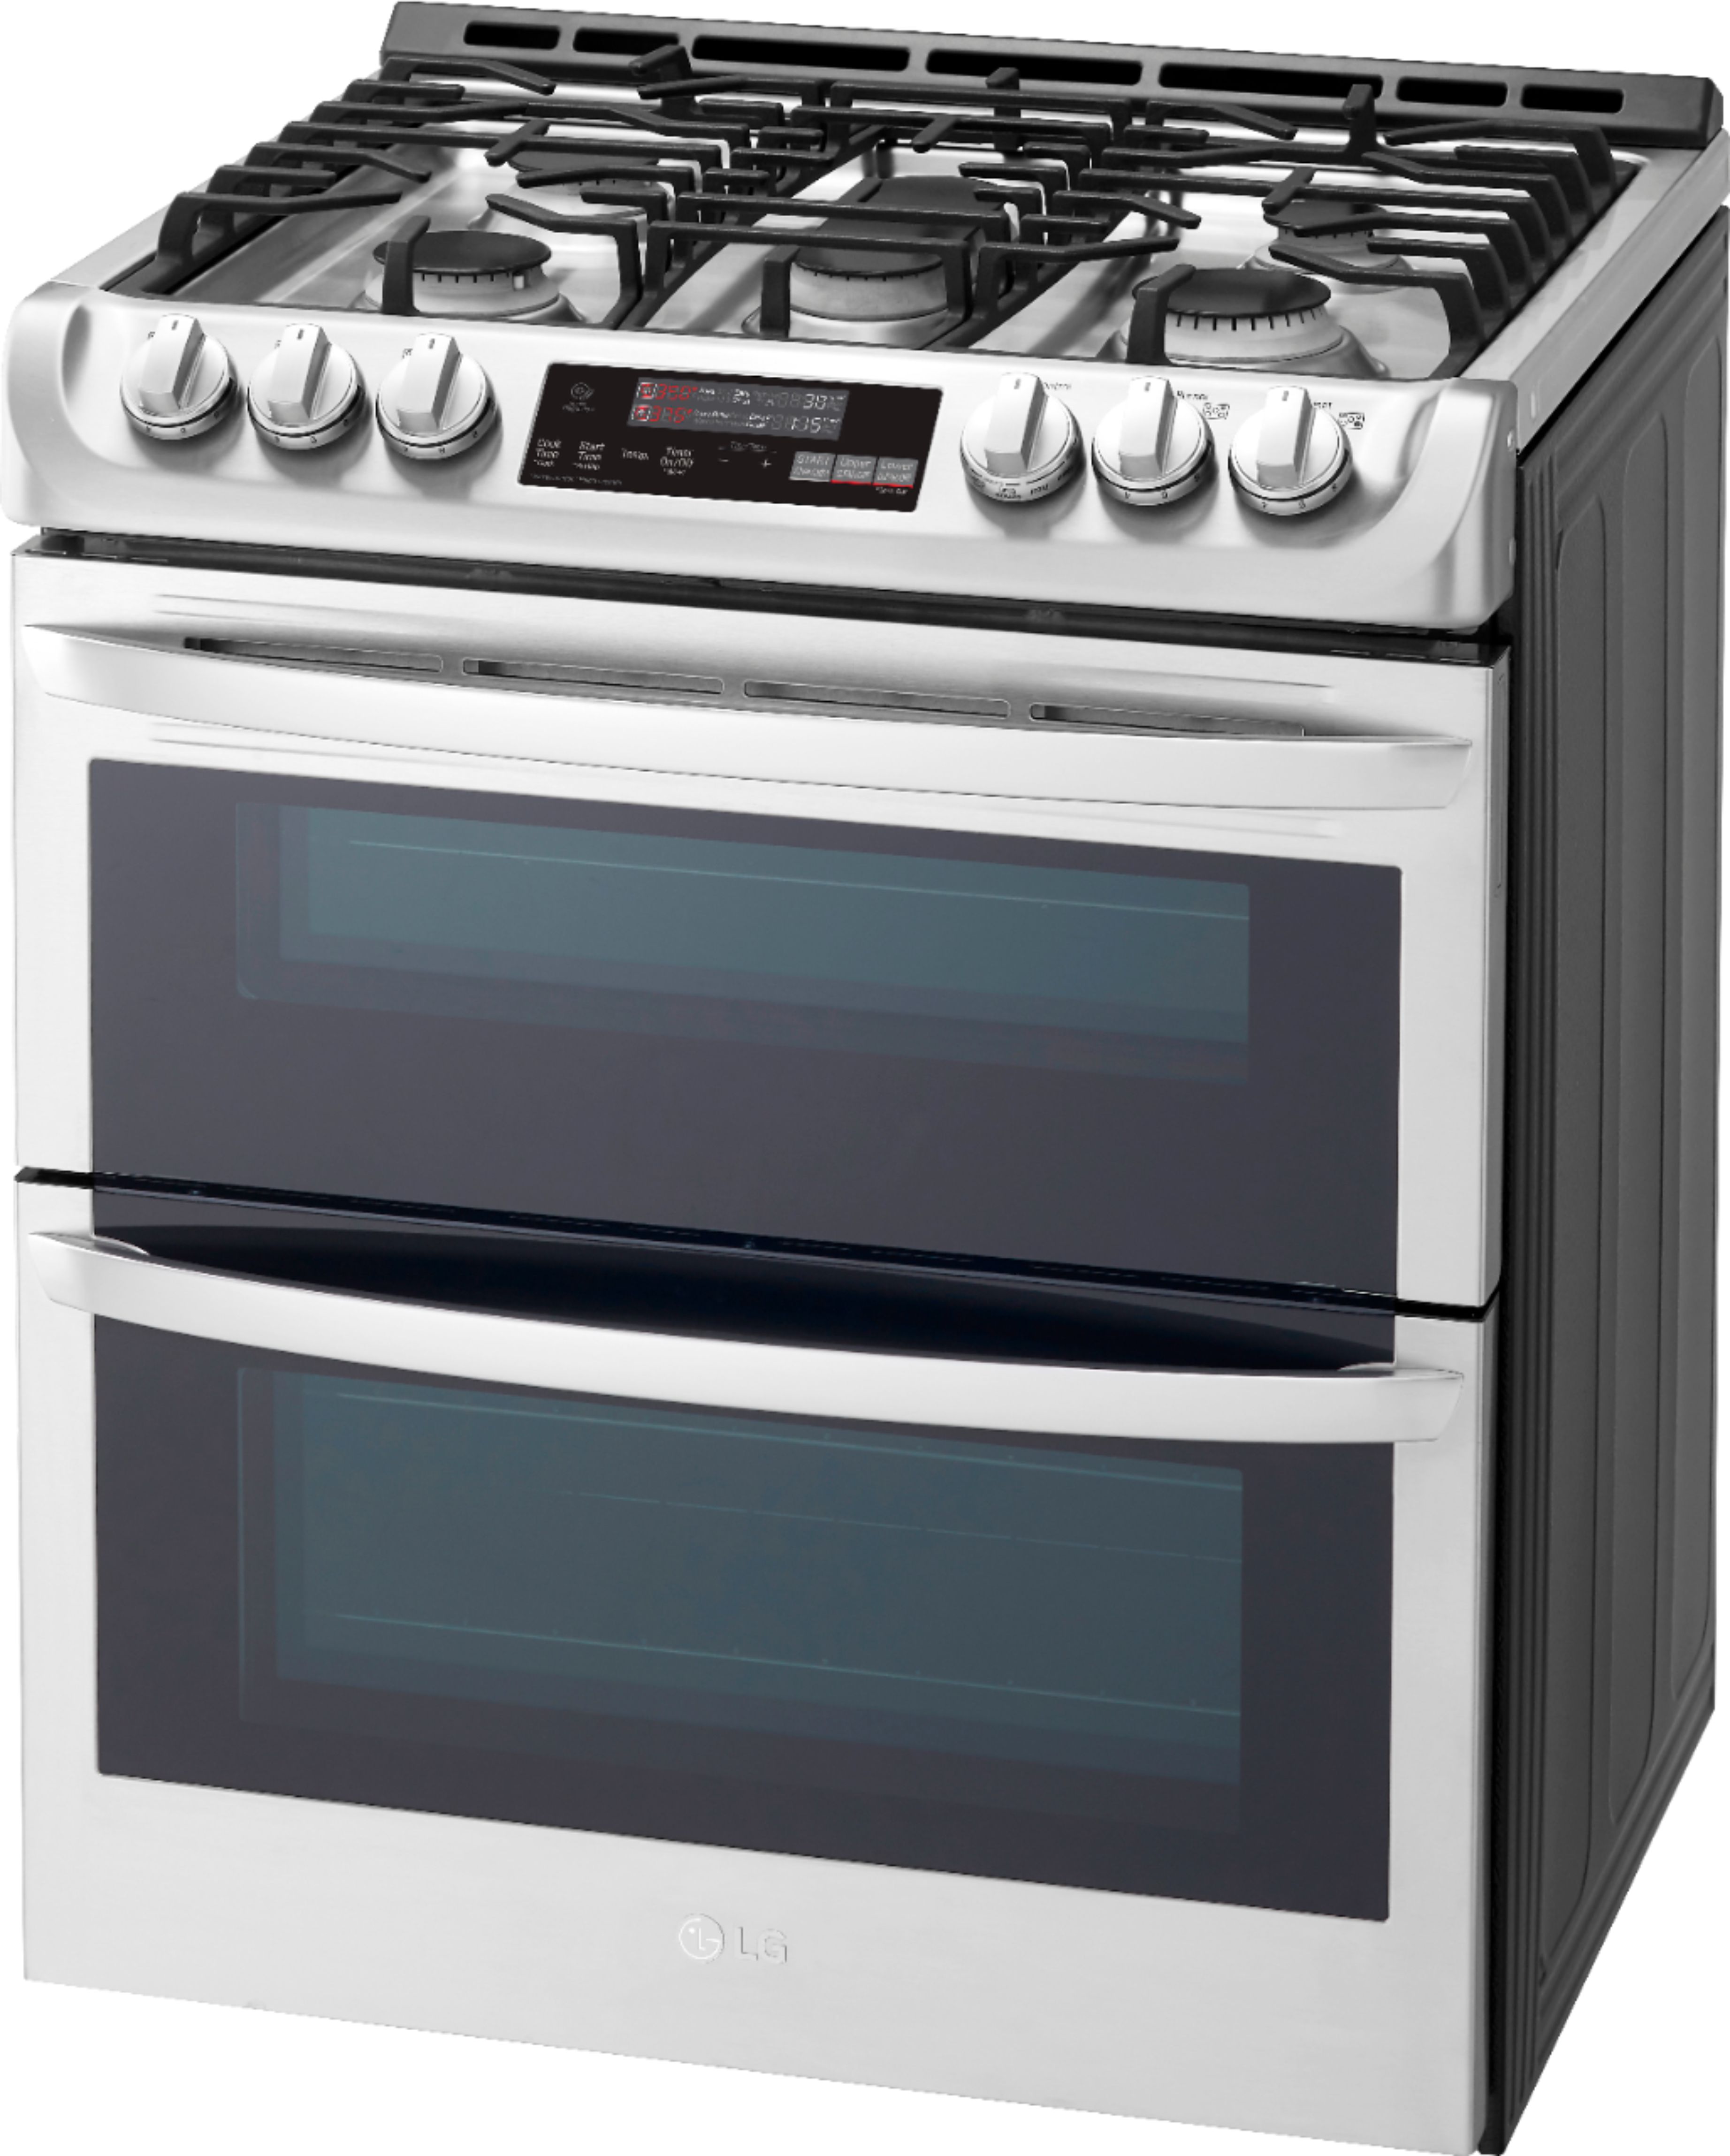 rust Philadelphia Delegeren LG 6.9 Cu. Ft. Slide-In Double Oven Gas True Convection Range with  EasyClean and ThinQ Technology Stainless steel LTG4715ST - Best Buy